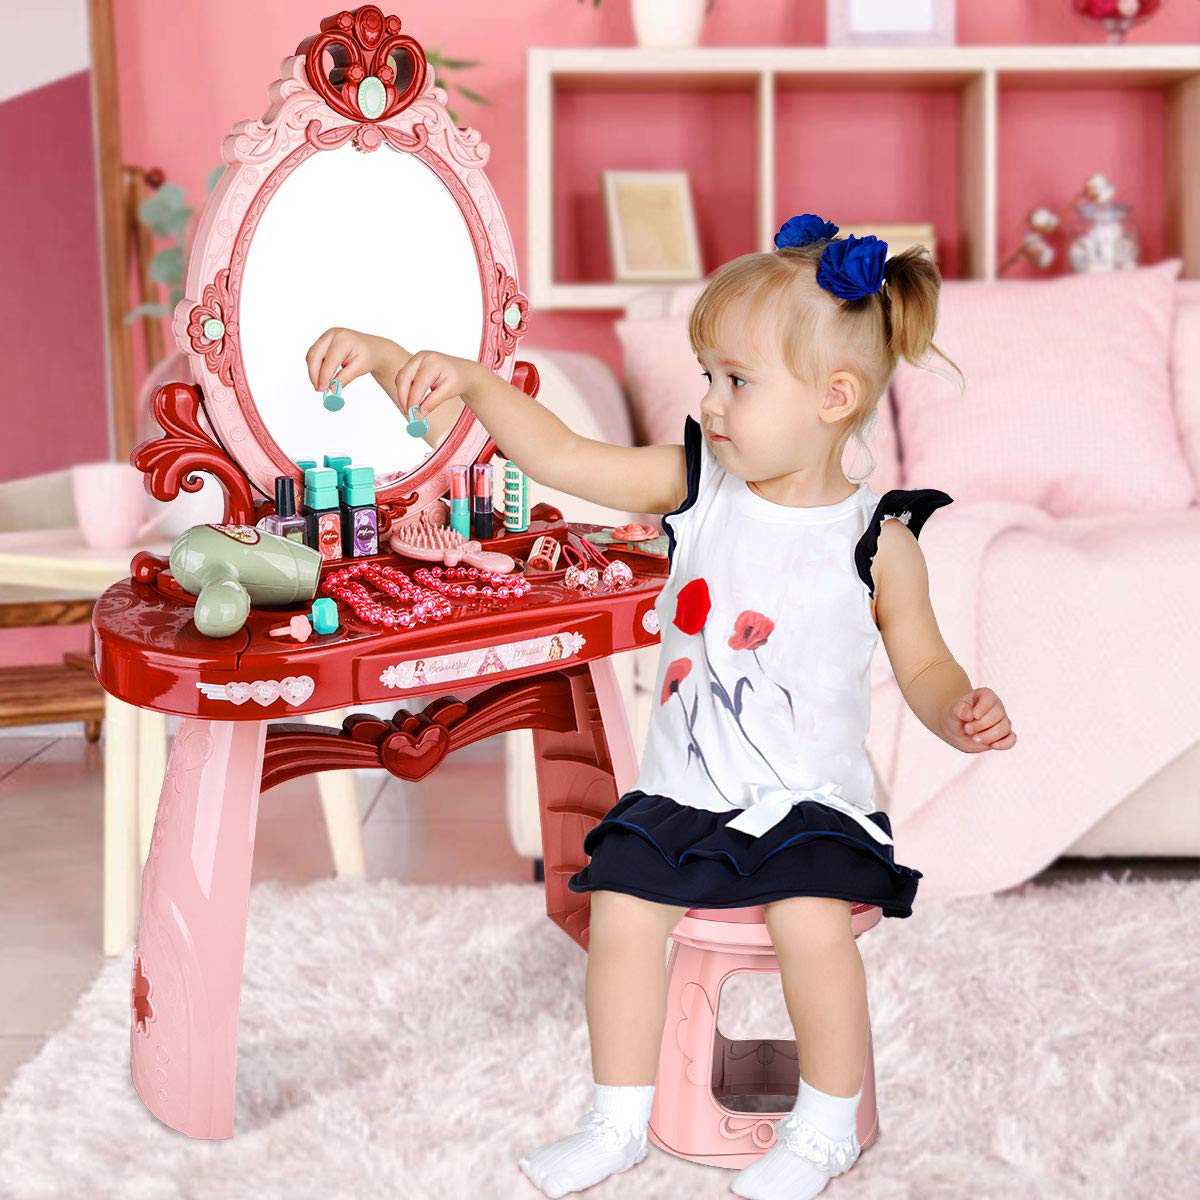 Meland Toddler Vanity Set - Kids Toy Vanity Table for Little Girls with Sound and Light Mirror and Beauty Accessories, Birthday Toys for Little Princess Pretend Play